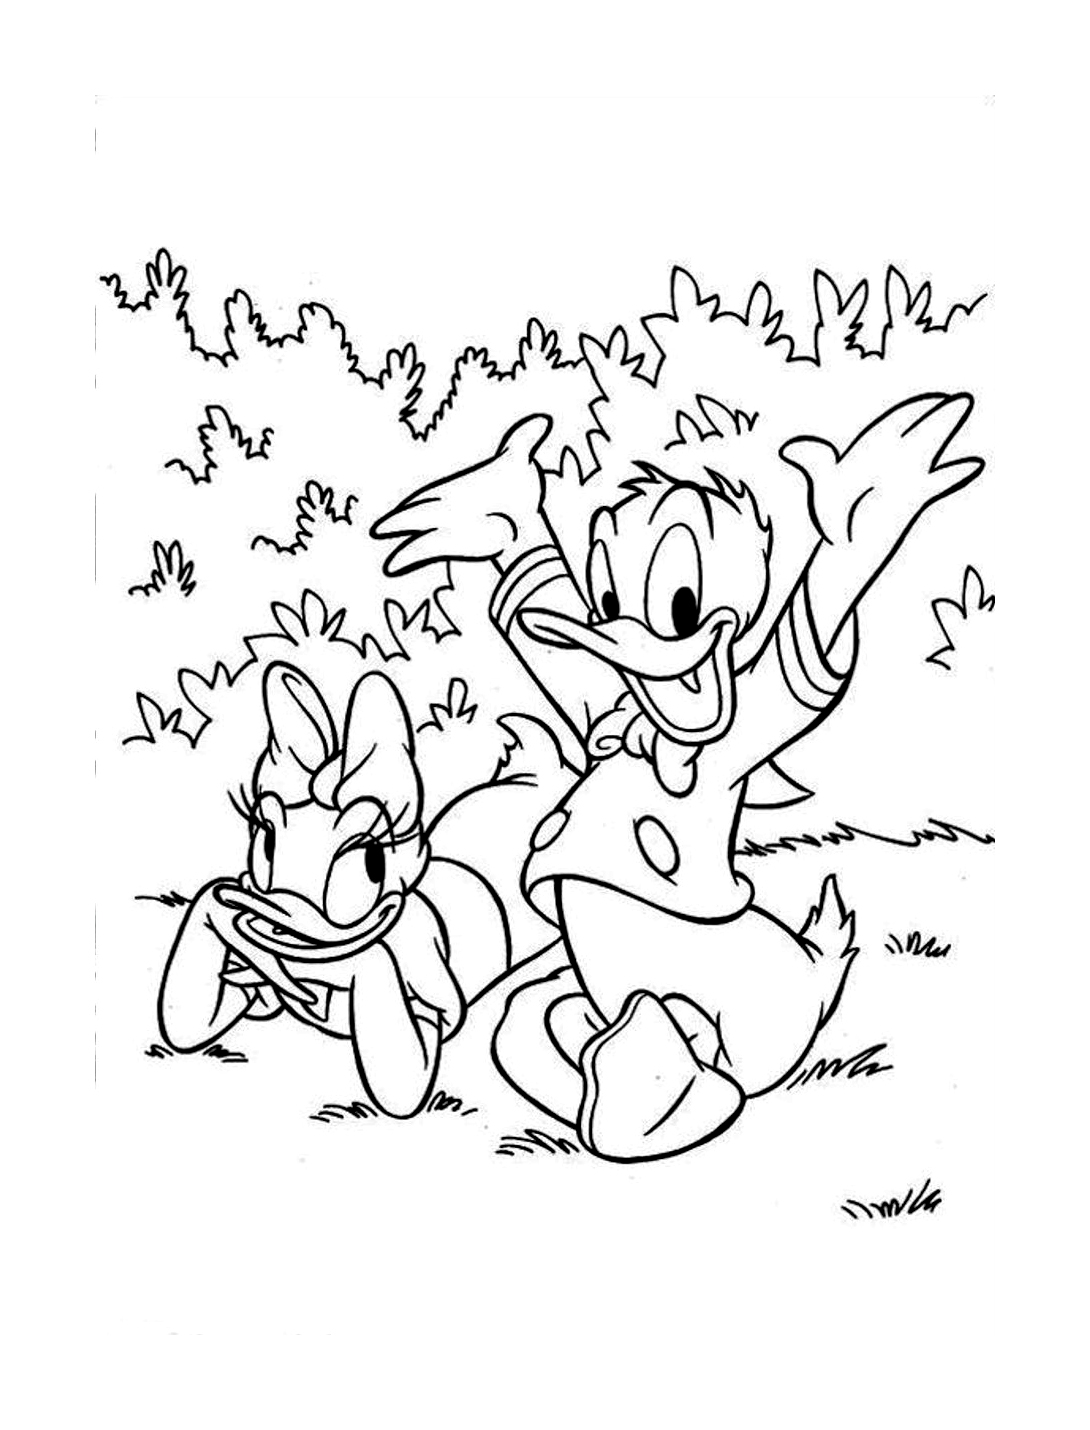 Donald and his friend Daisy on a picnic